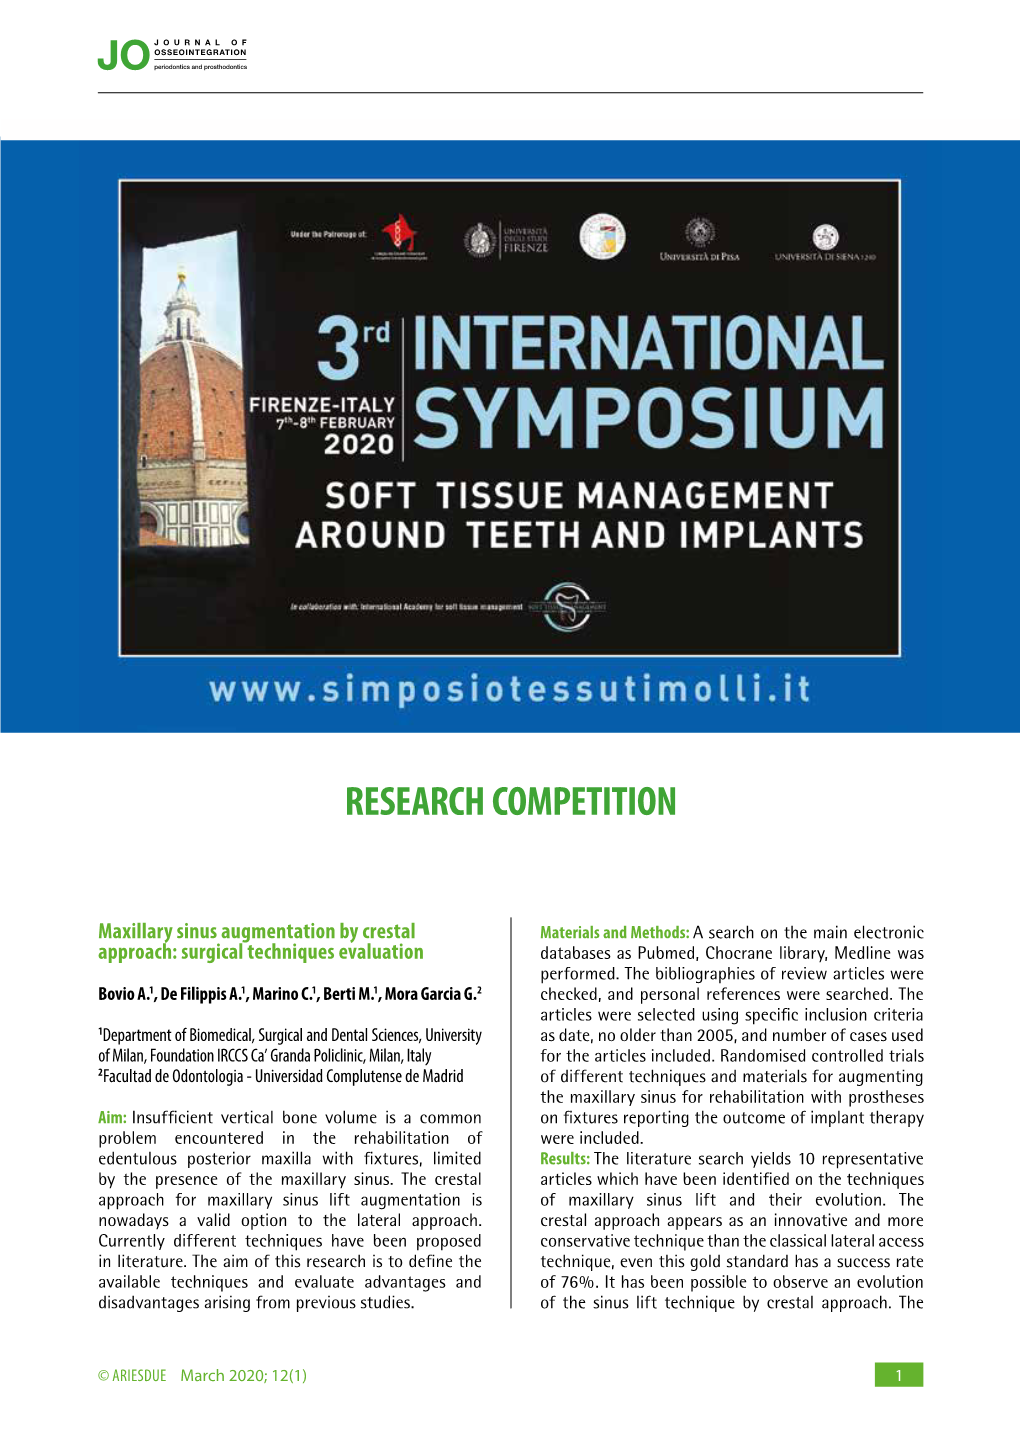 Research Competition